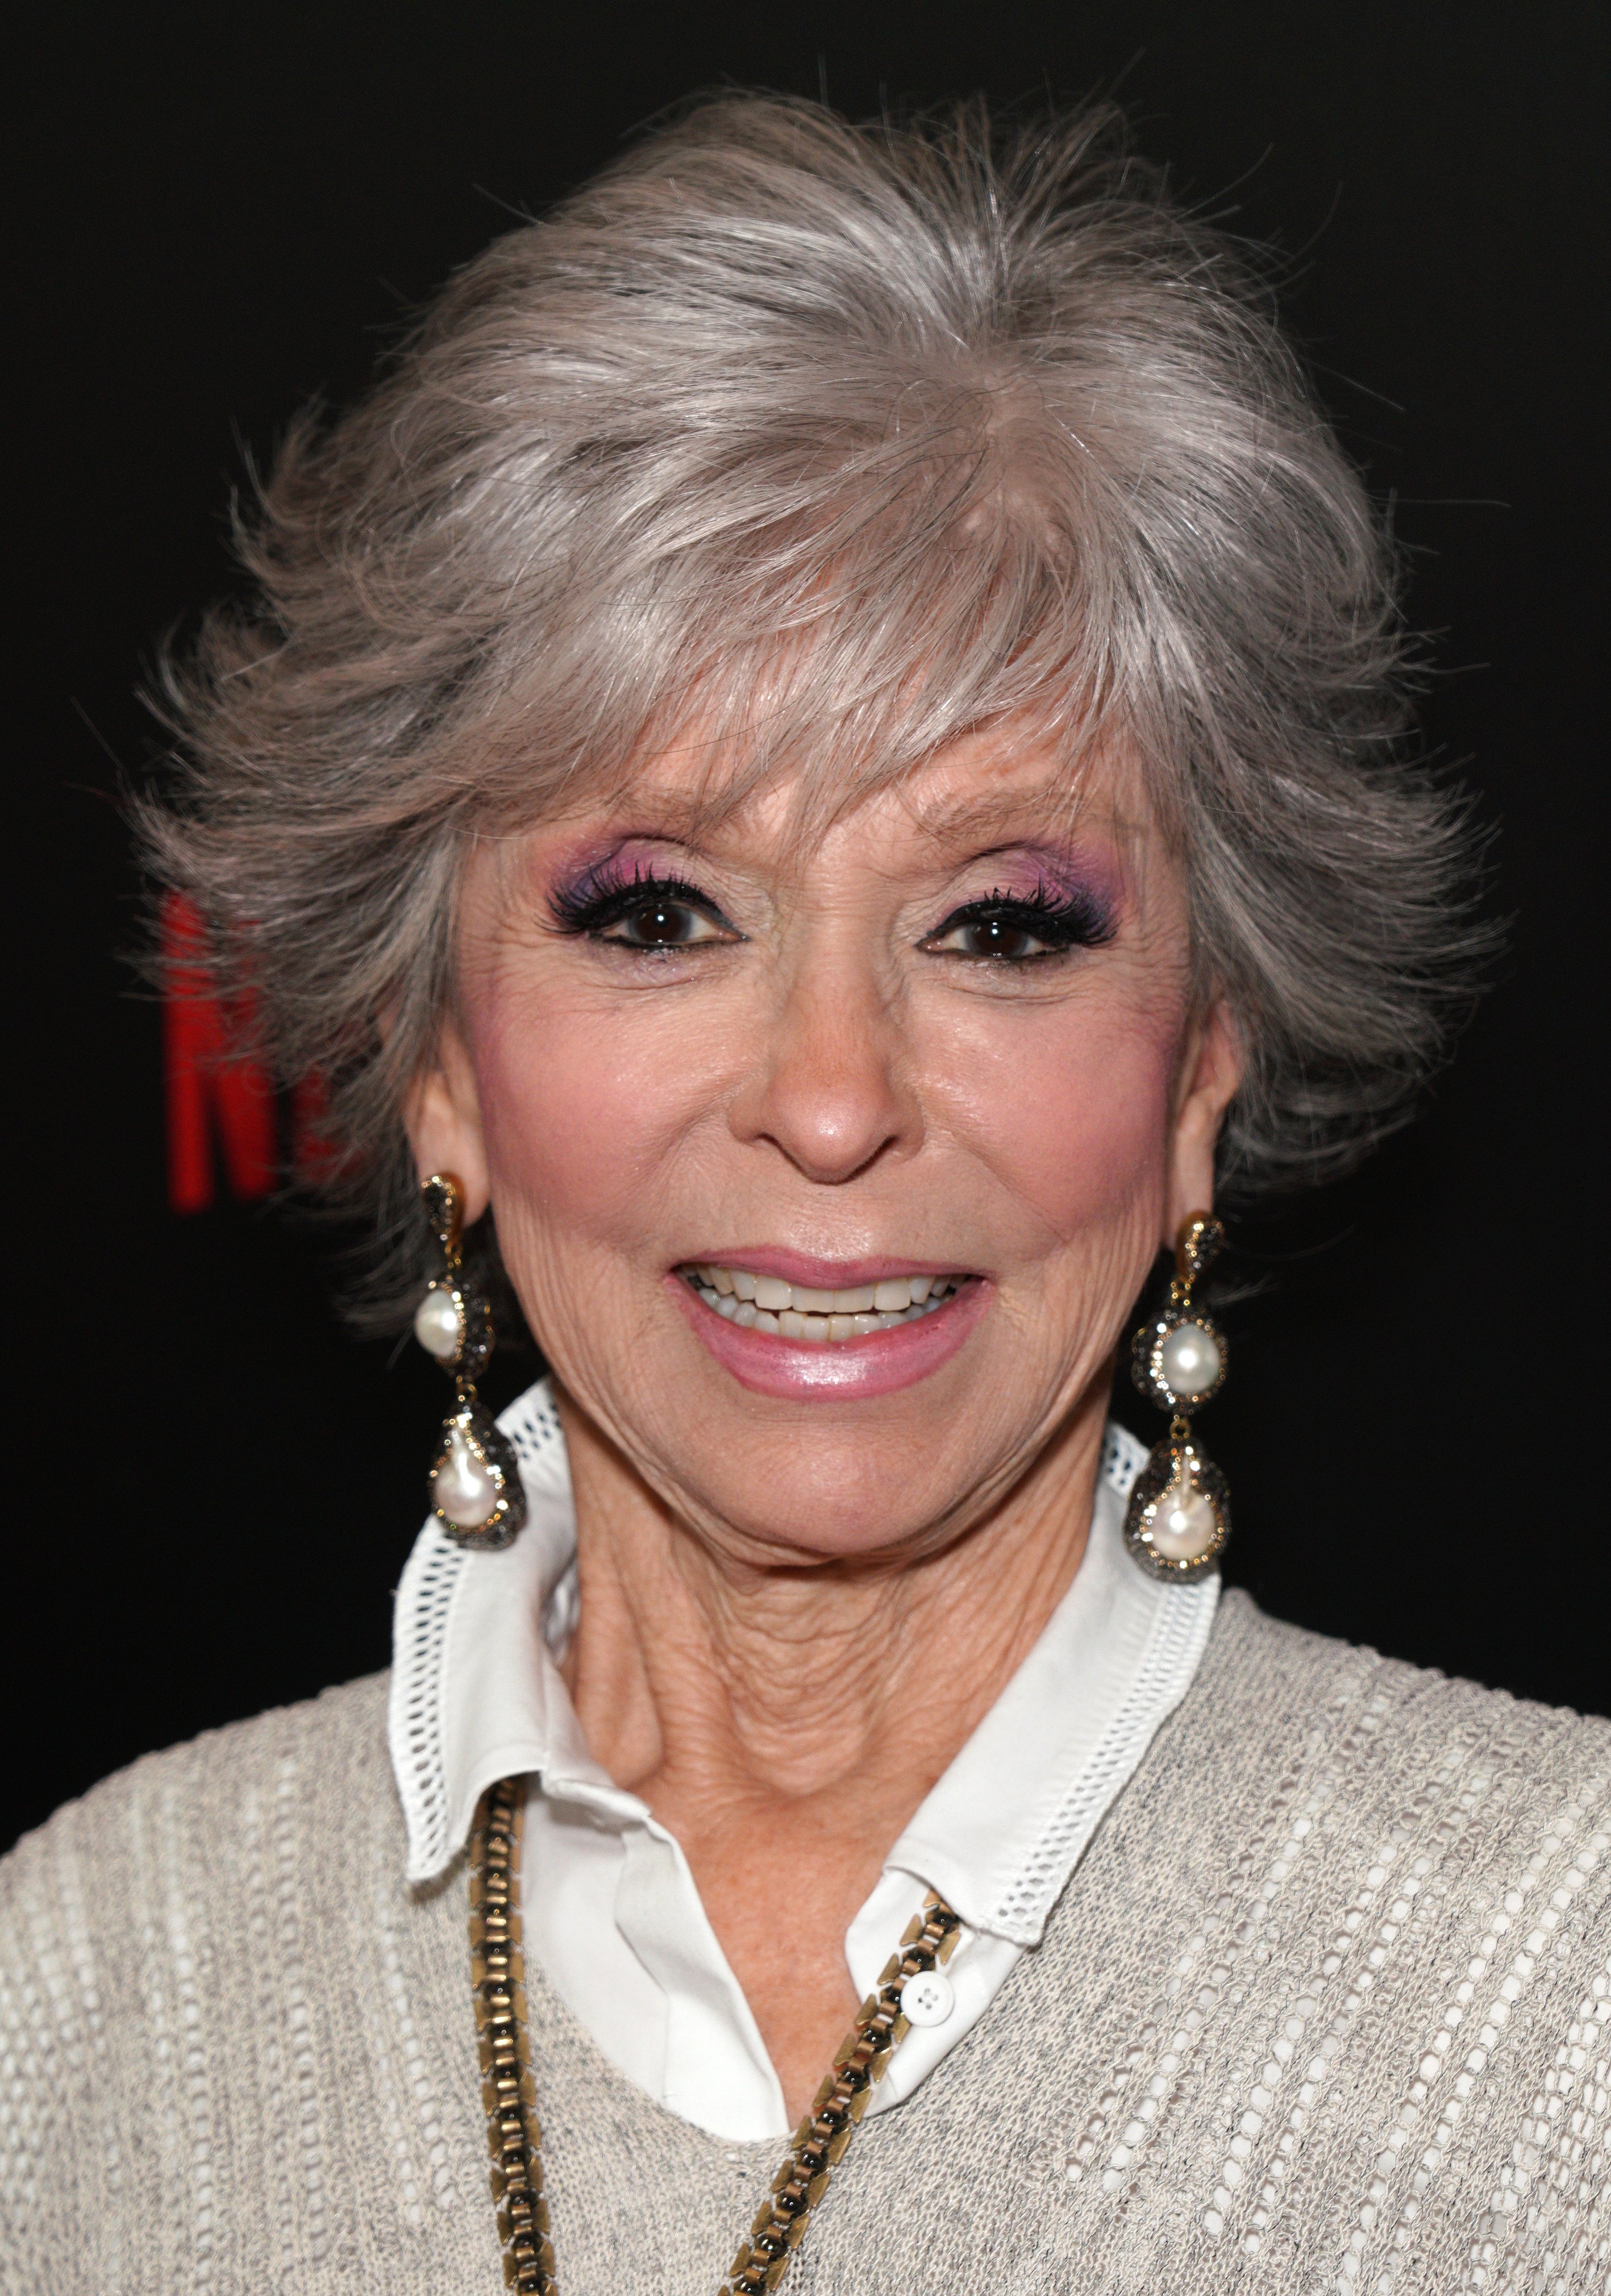 Rita Moreno attends the premiere of Netflix's 'One Day At A Time' Season 3 at Regal Cinemas L.A. LIVE Stadium 14 on February 07, 2019, in Los Angeles, California. | Source: Getty Images.